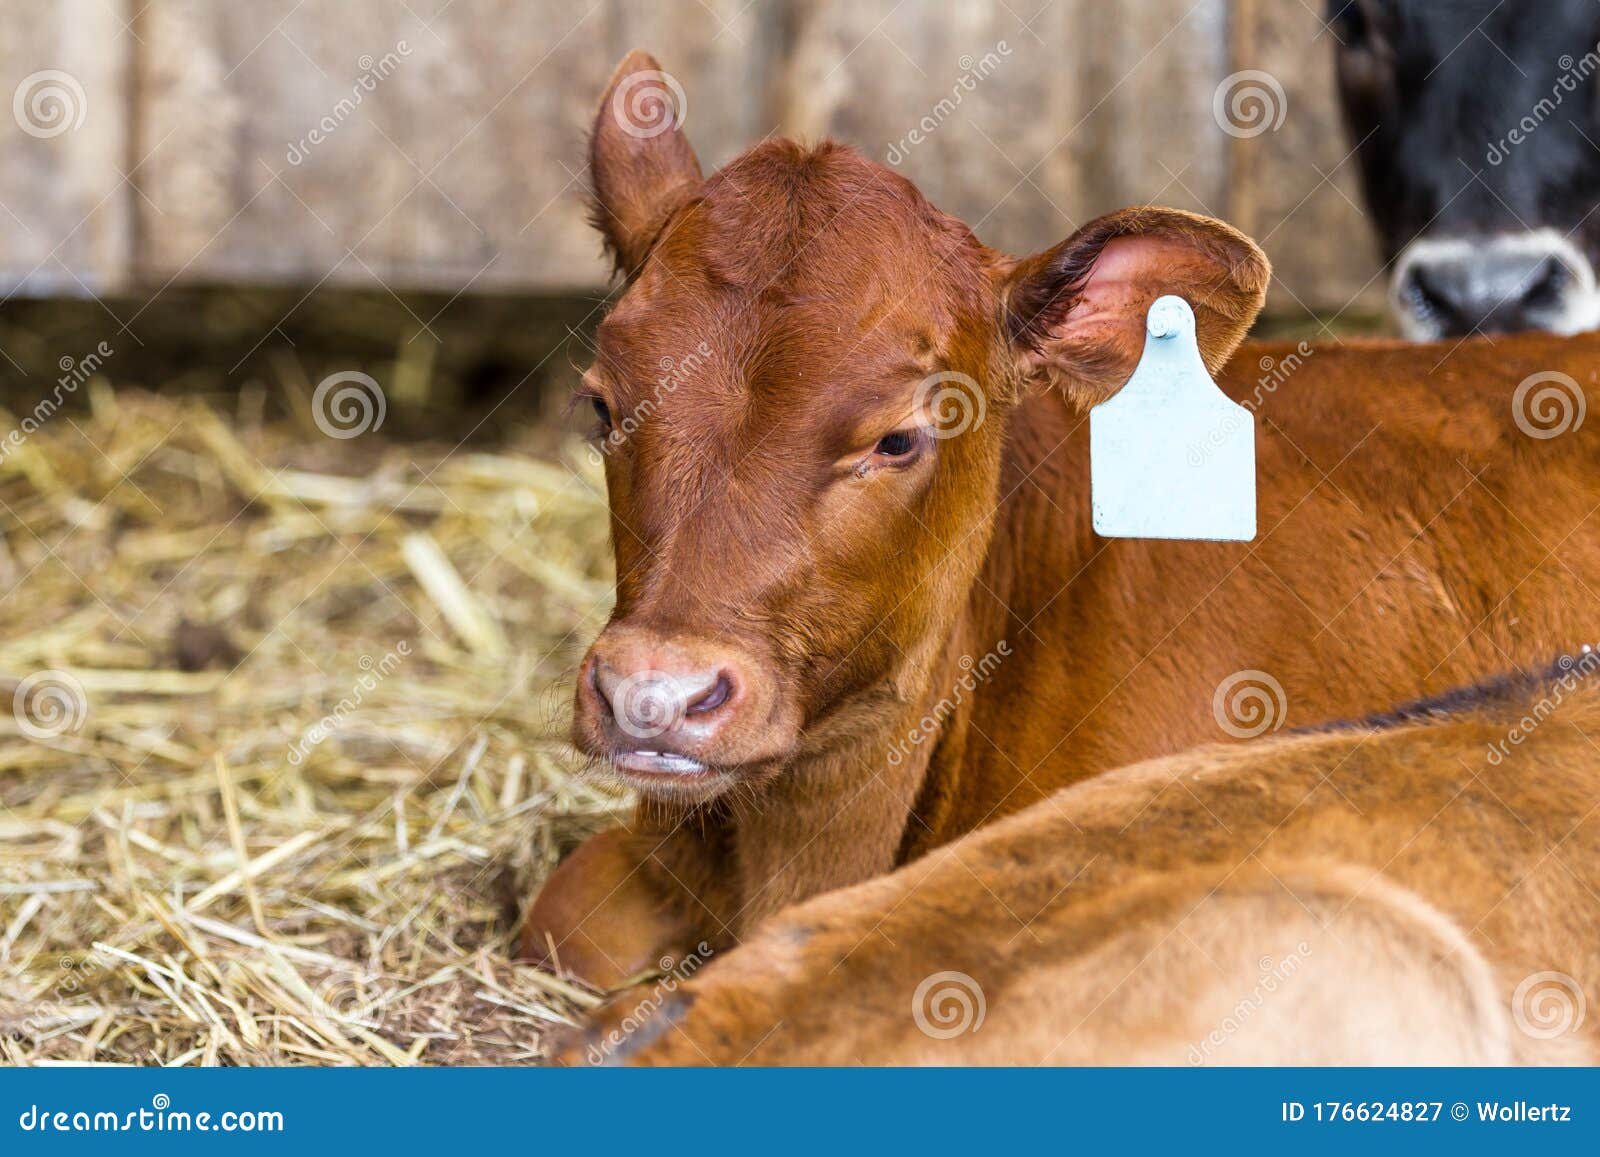 Young jersey calfs stock image. Image of central, destination - 176624827